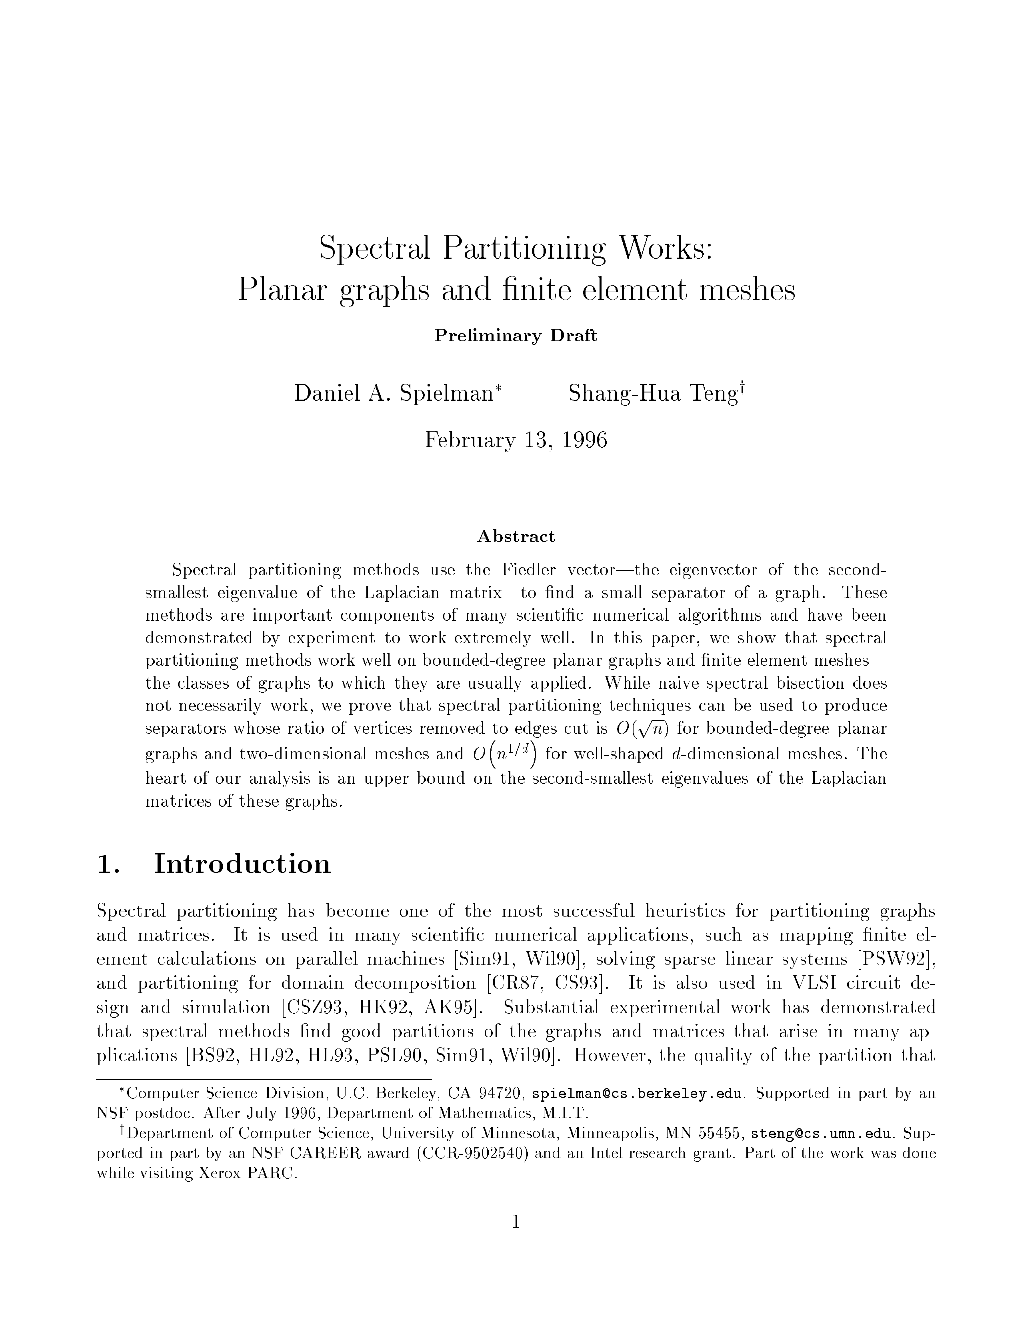 Spectral Partitioning Works